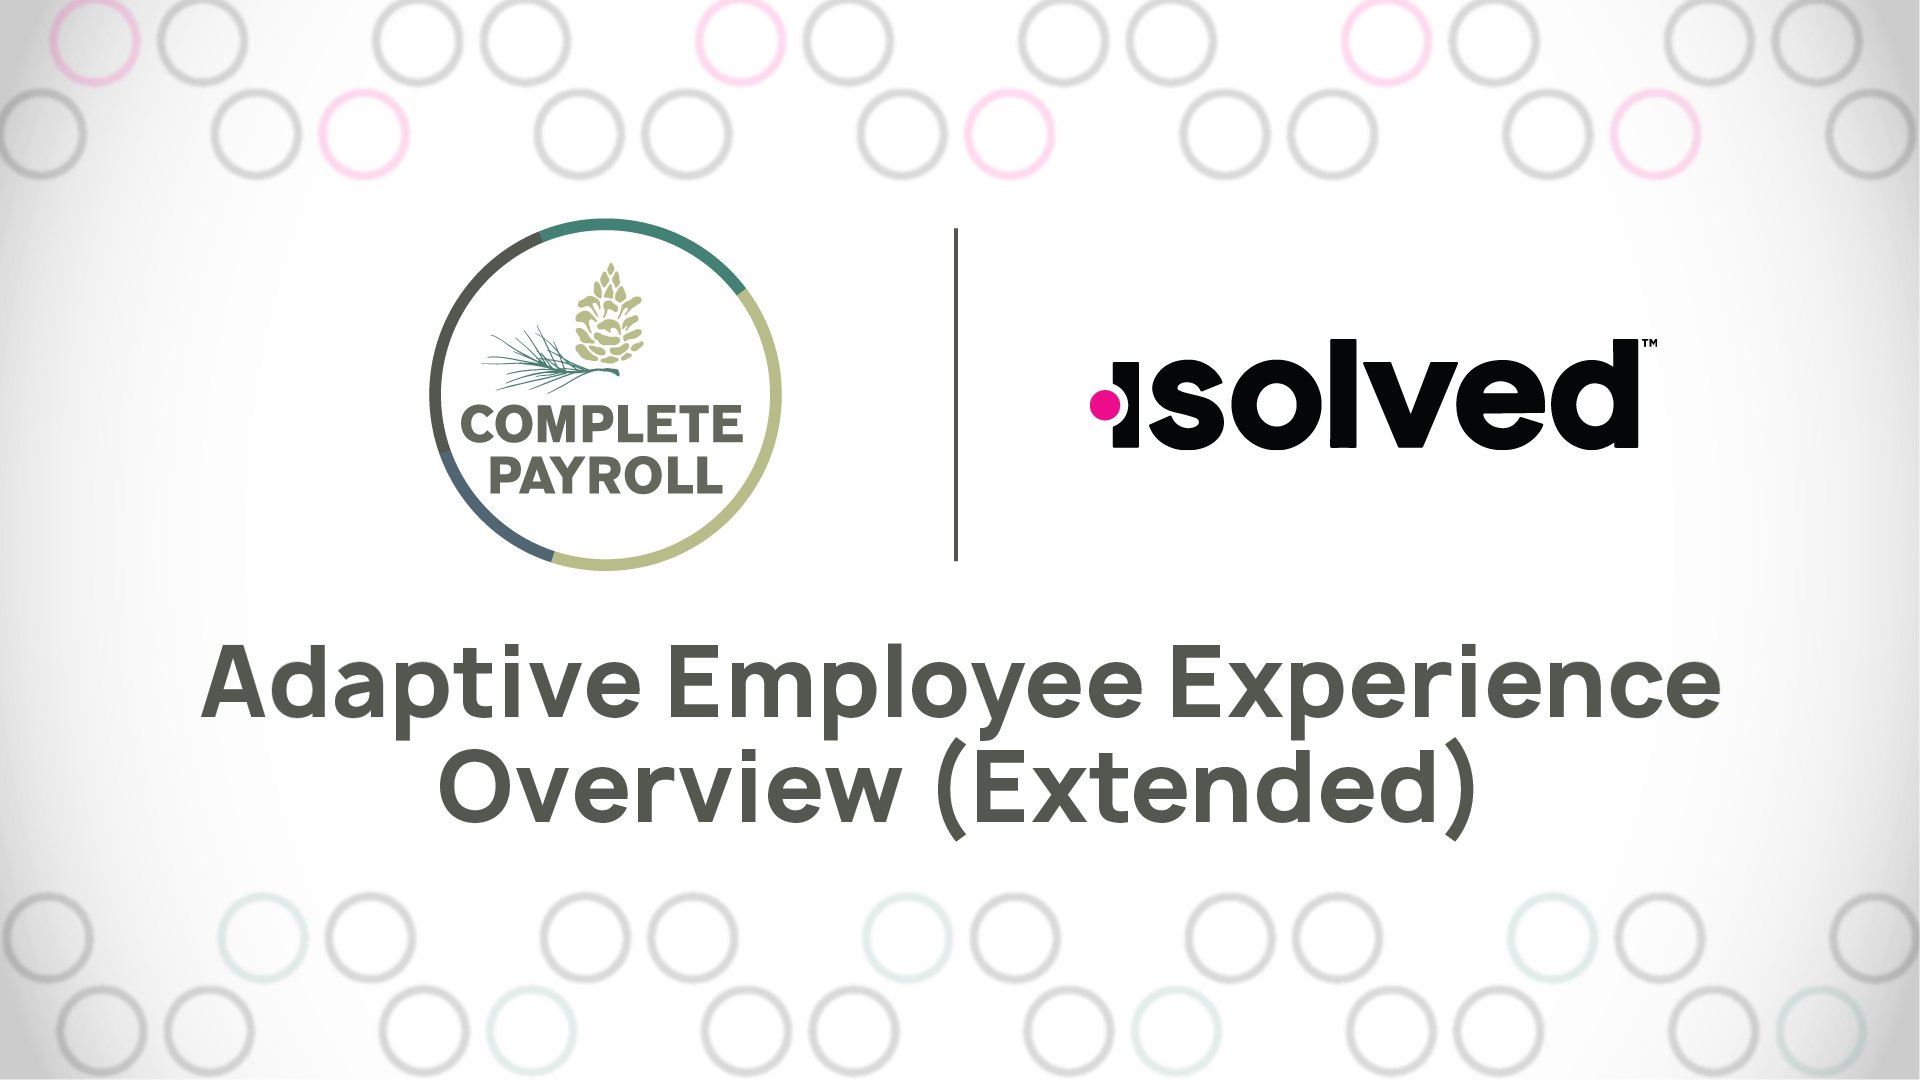 Adaptive Employee Experience Overview (Extended)